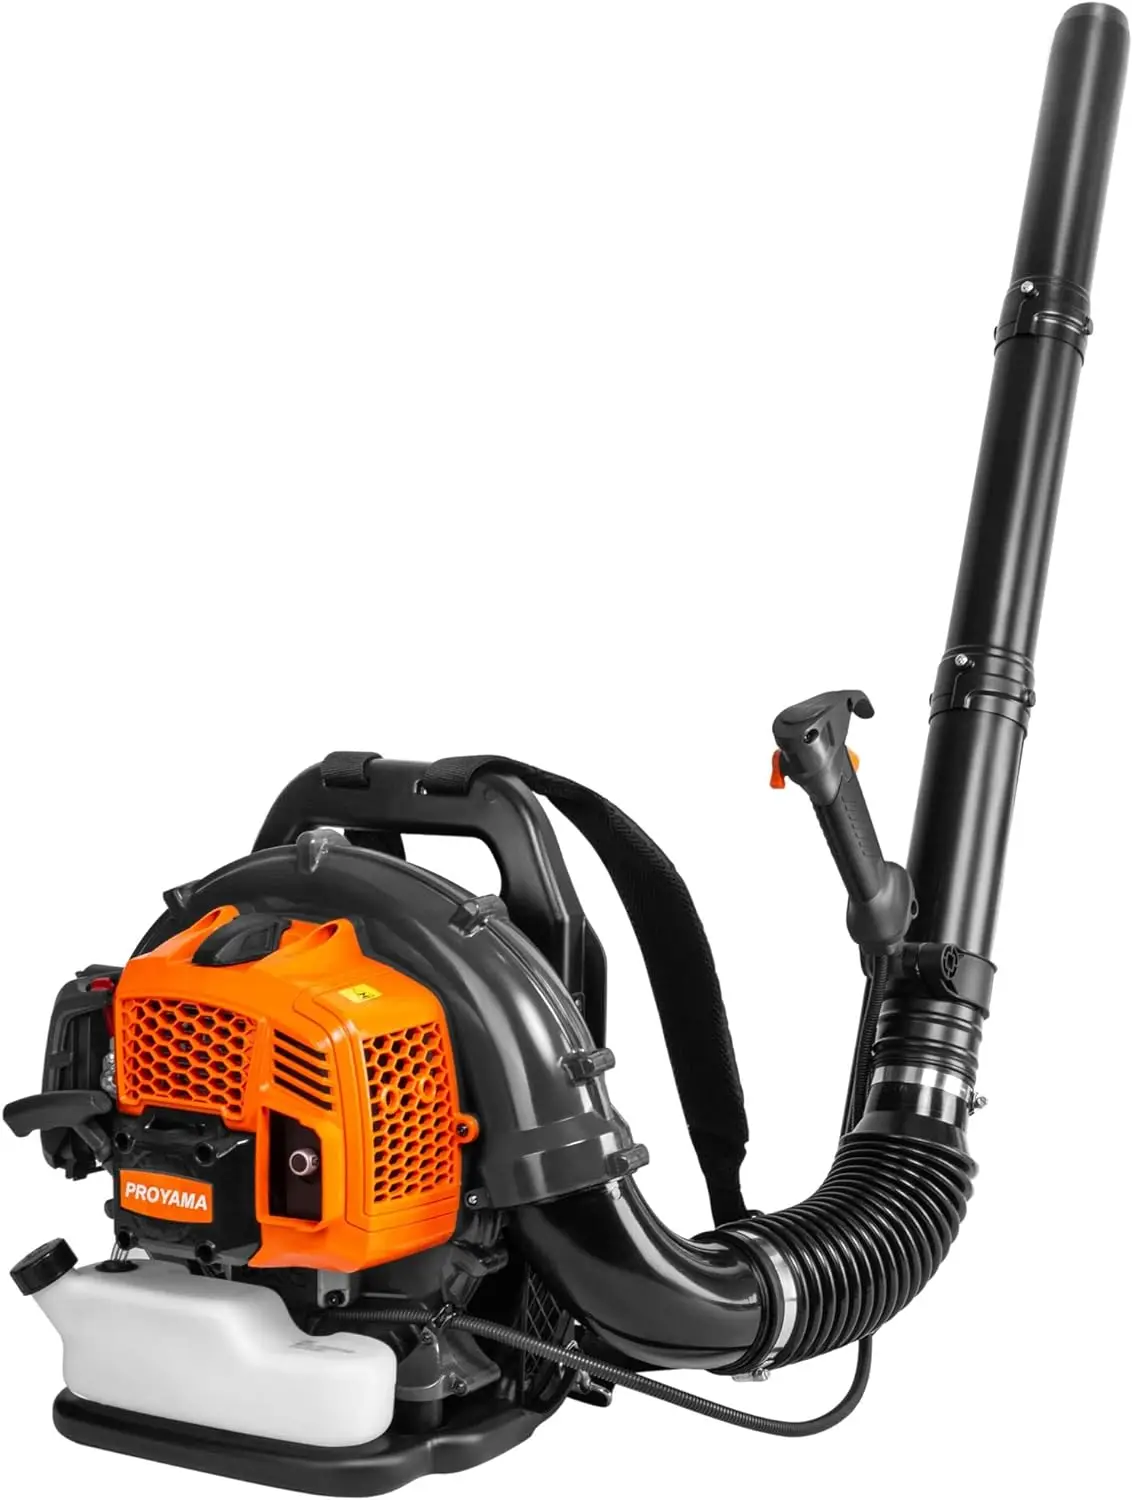 

PROYAMA 54CC Gas Powered Backpack Leaf Blower 780CFM 248MPH Extreme Duty 2-Cycle Gasoline Powered Leaf blowers